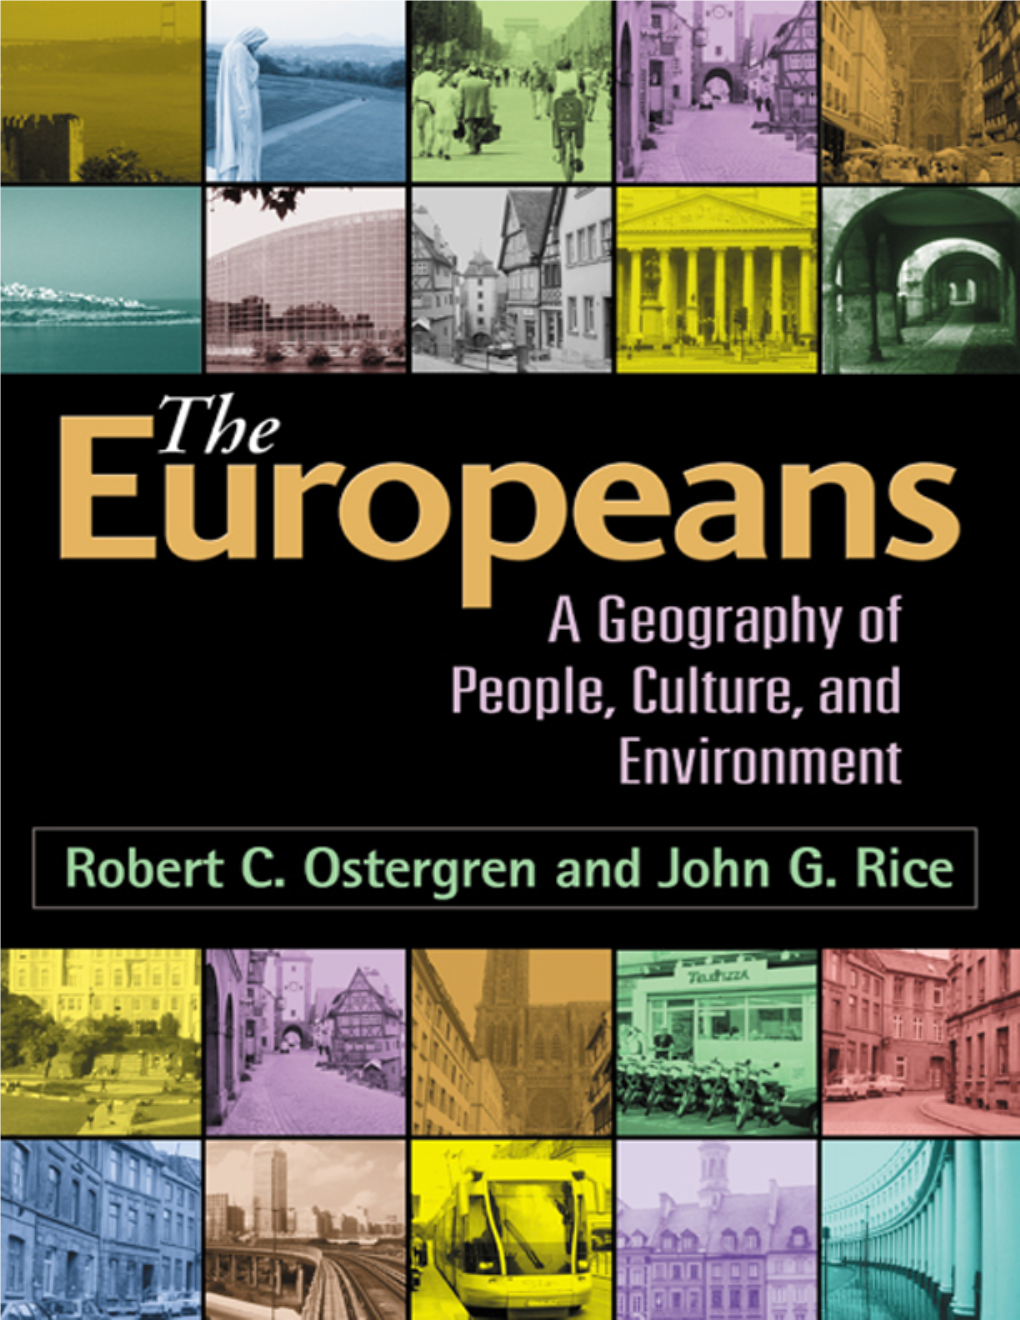 Europeans, The: a Geography of People, Culture, and Environment